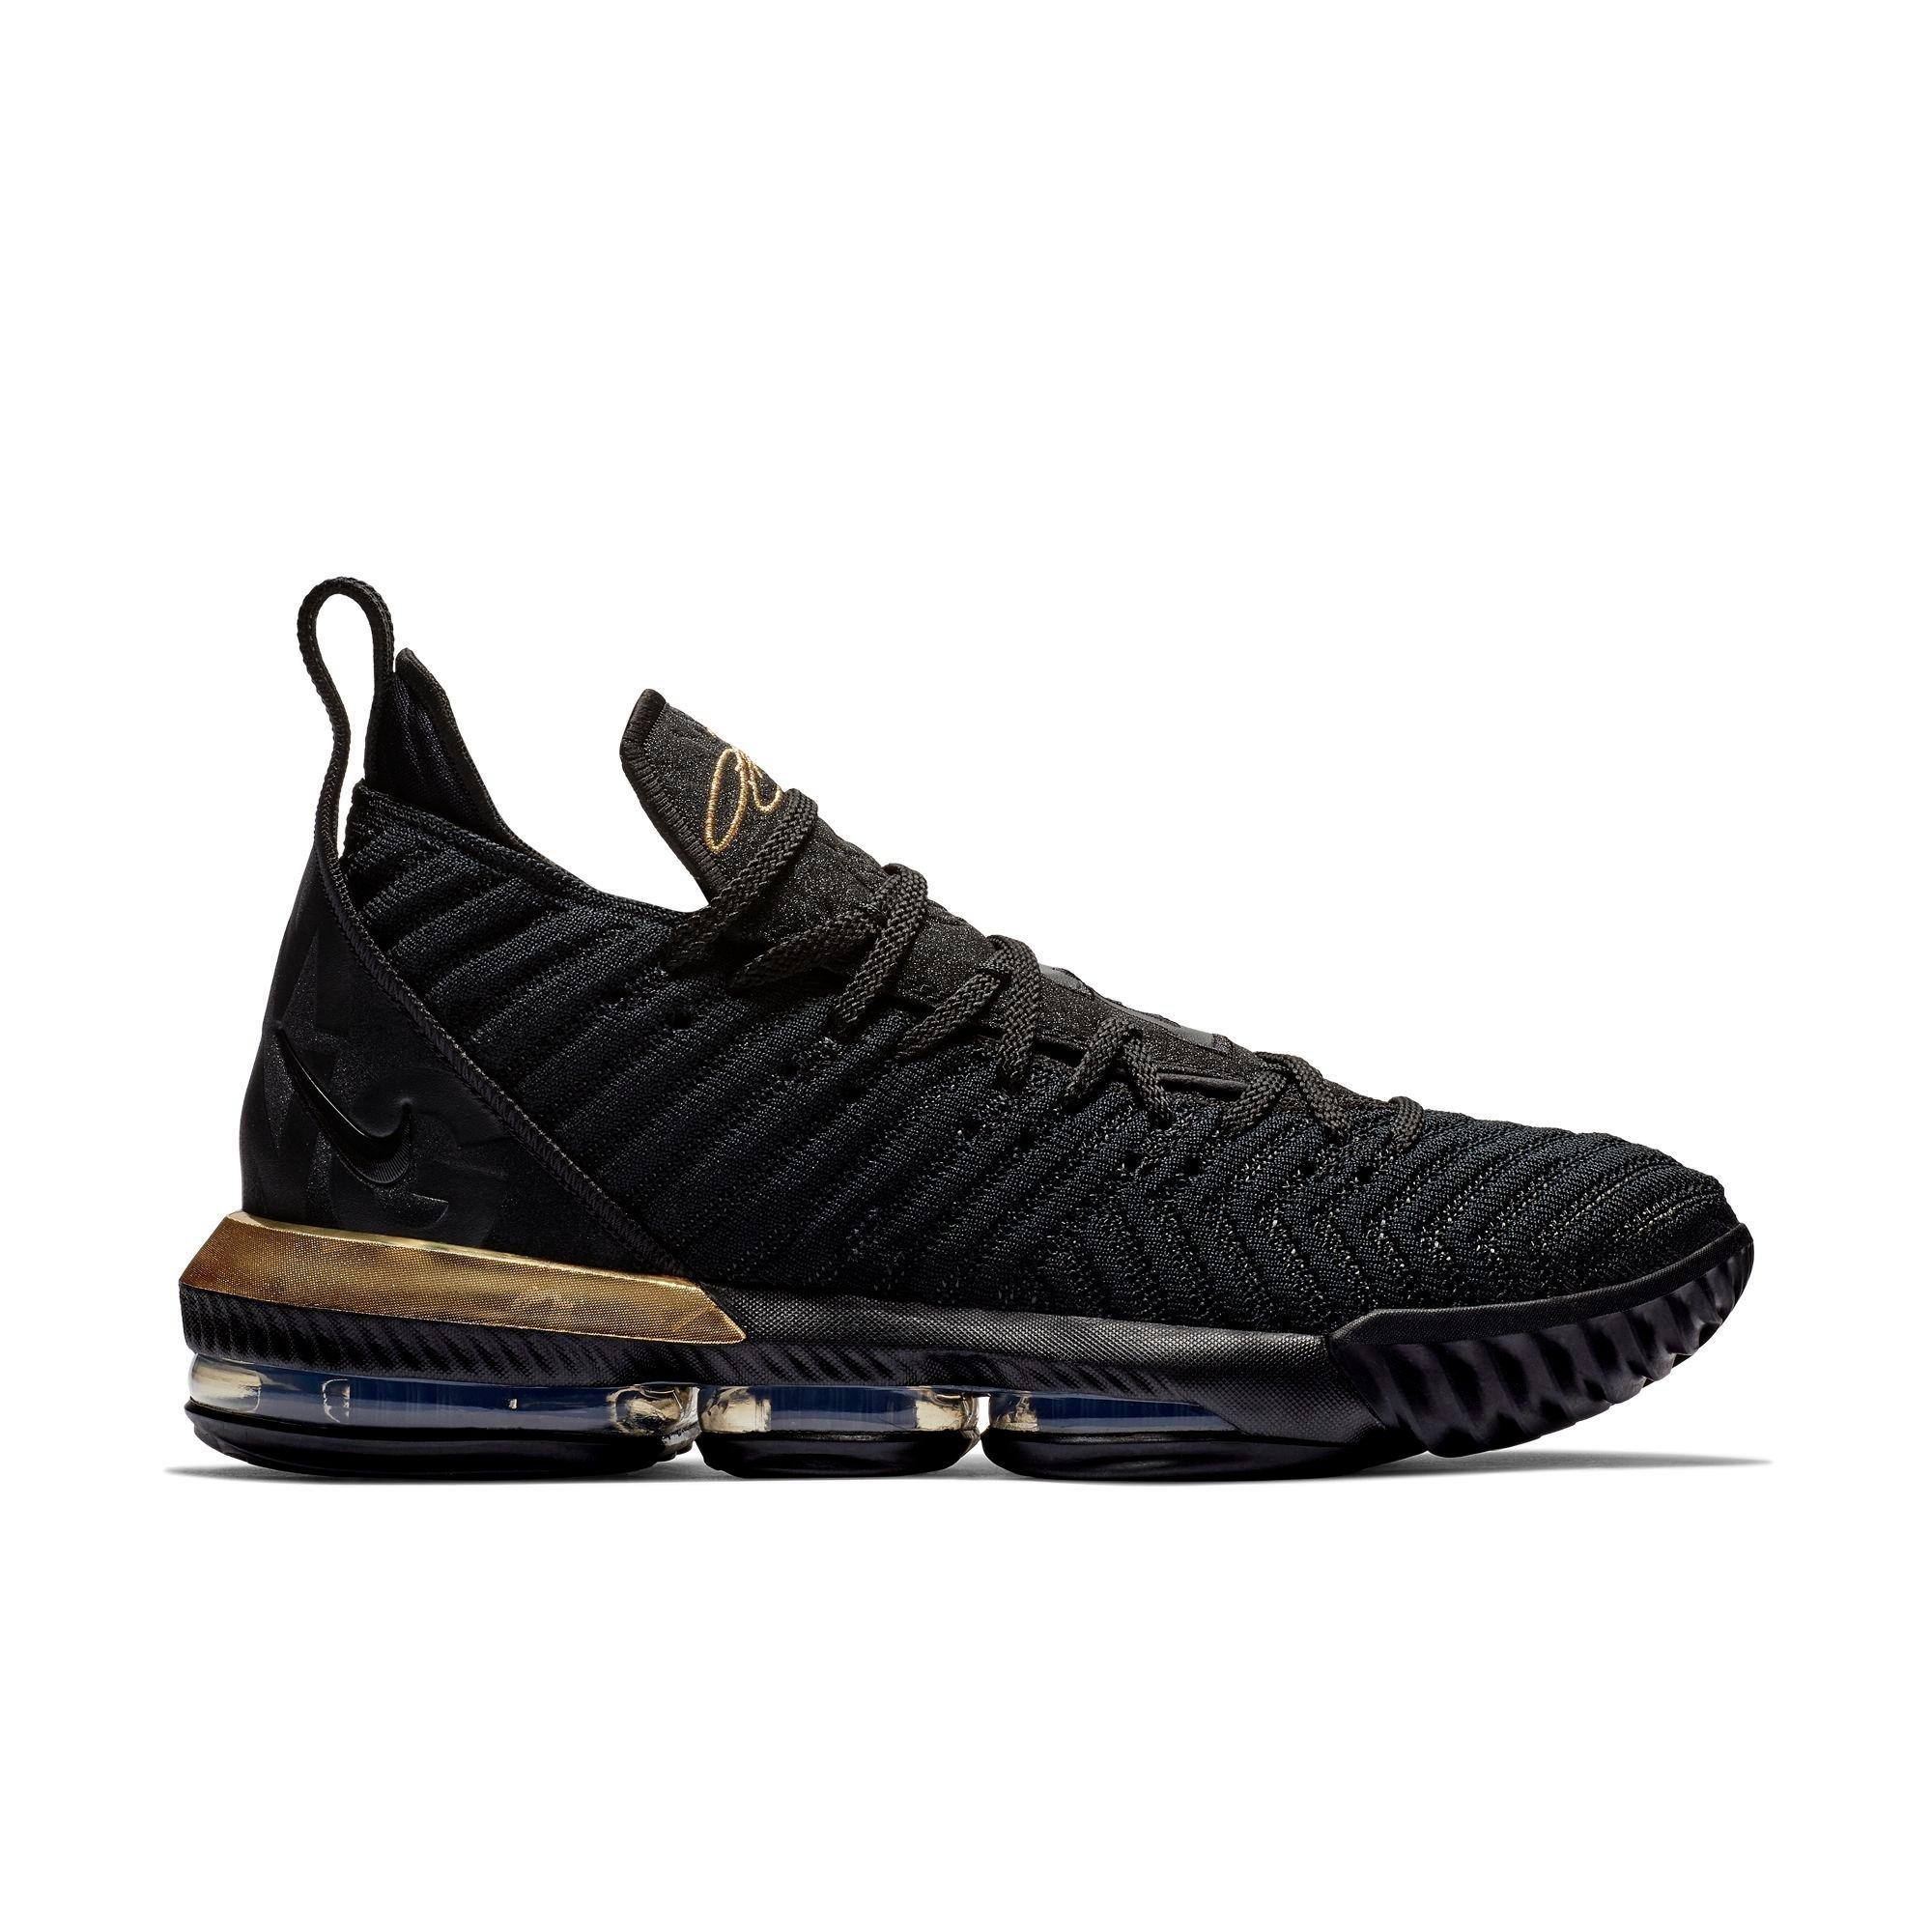 lebron 16 black and gold size 13